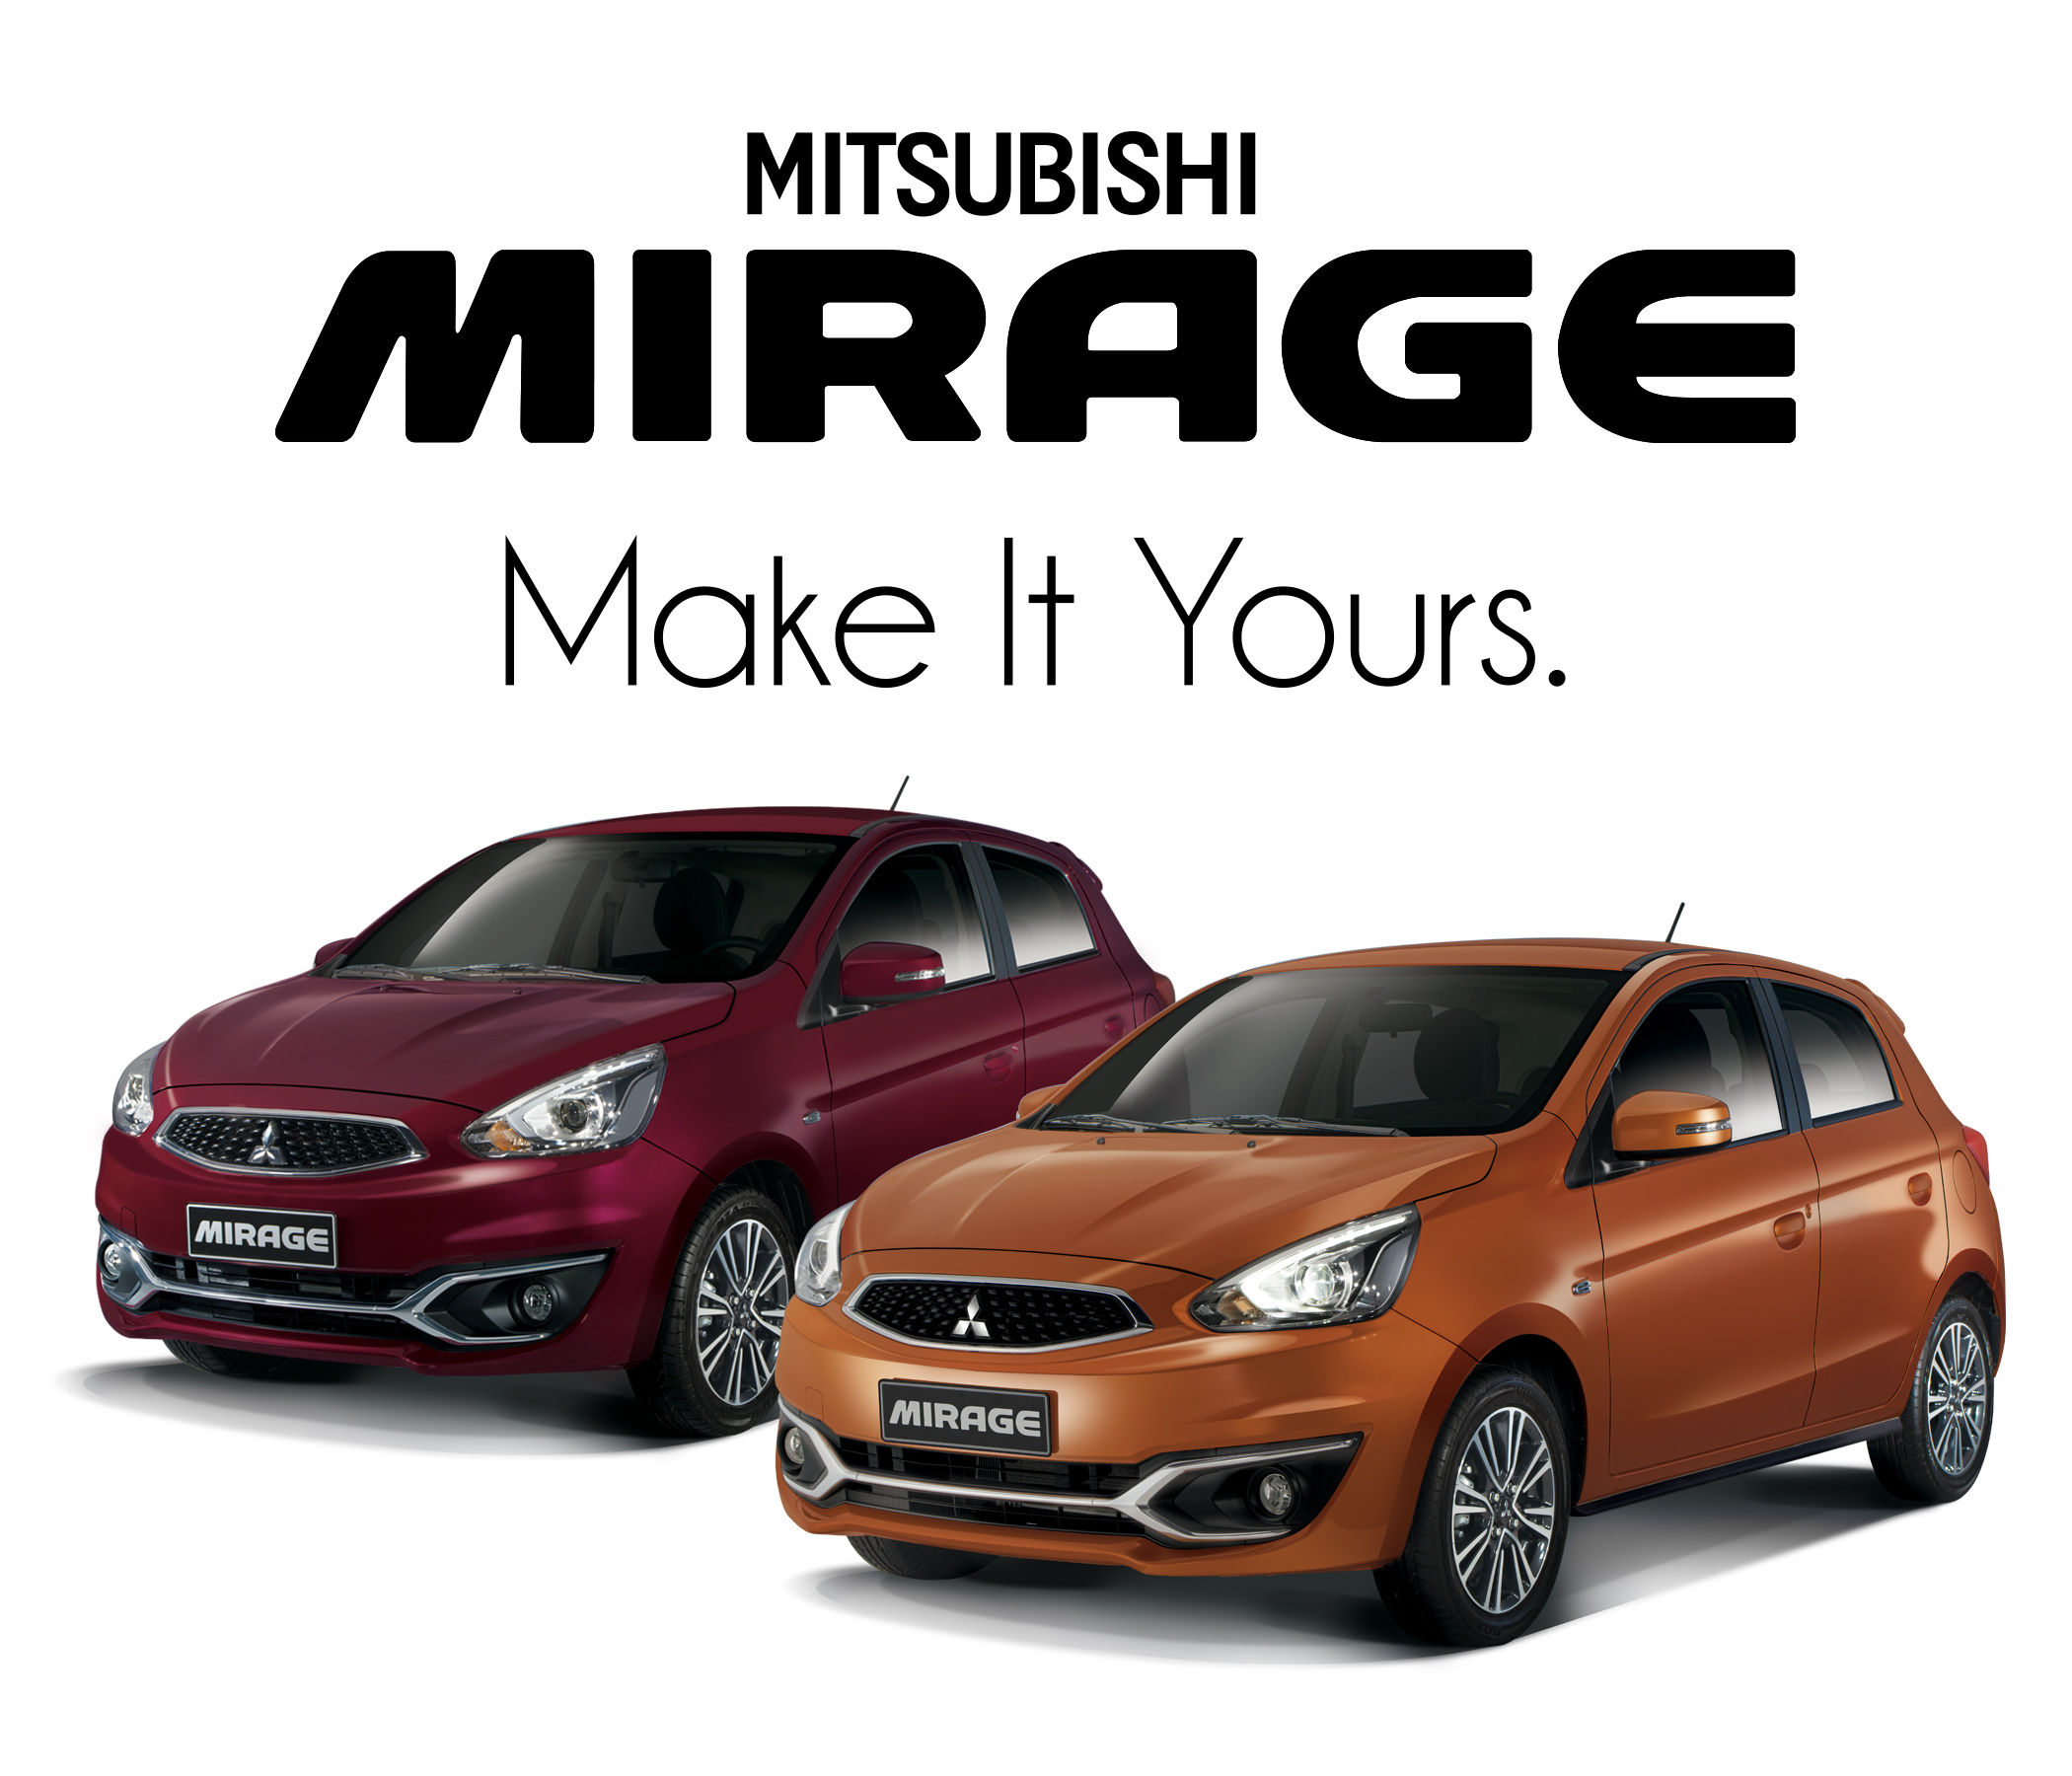 Mitsubishi Mirage 2016 Launched at Prices Starting  From PhP 553,000